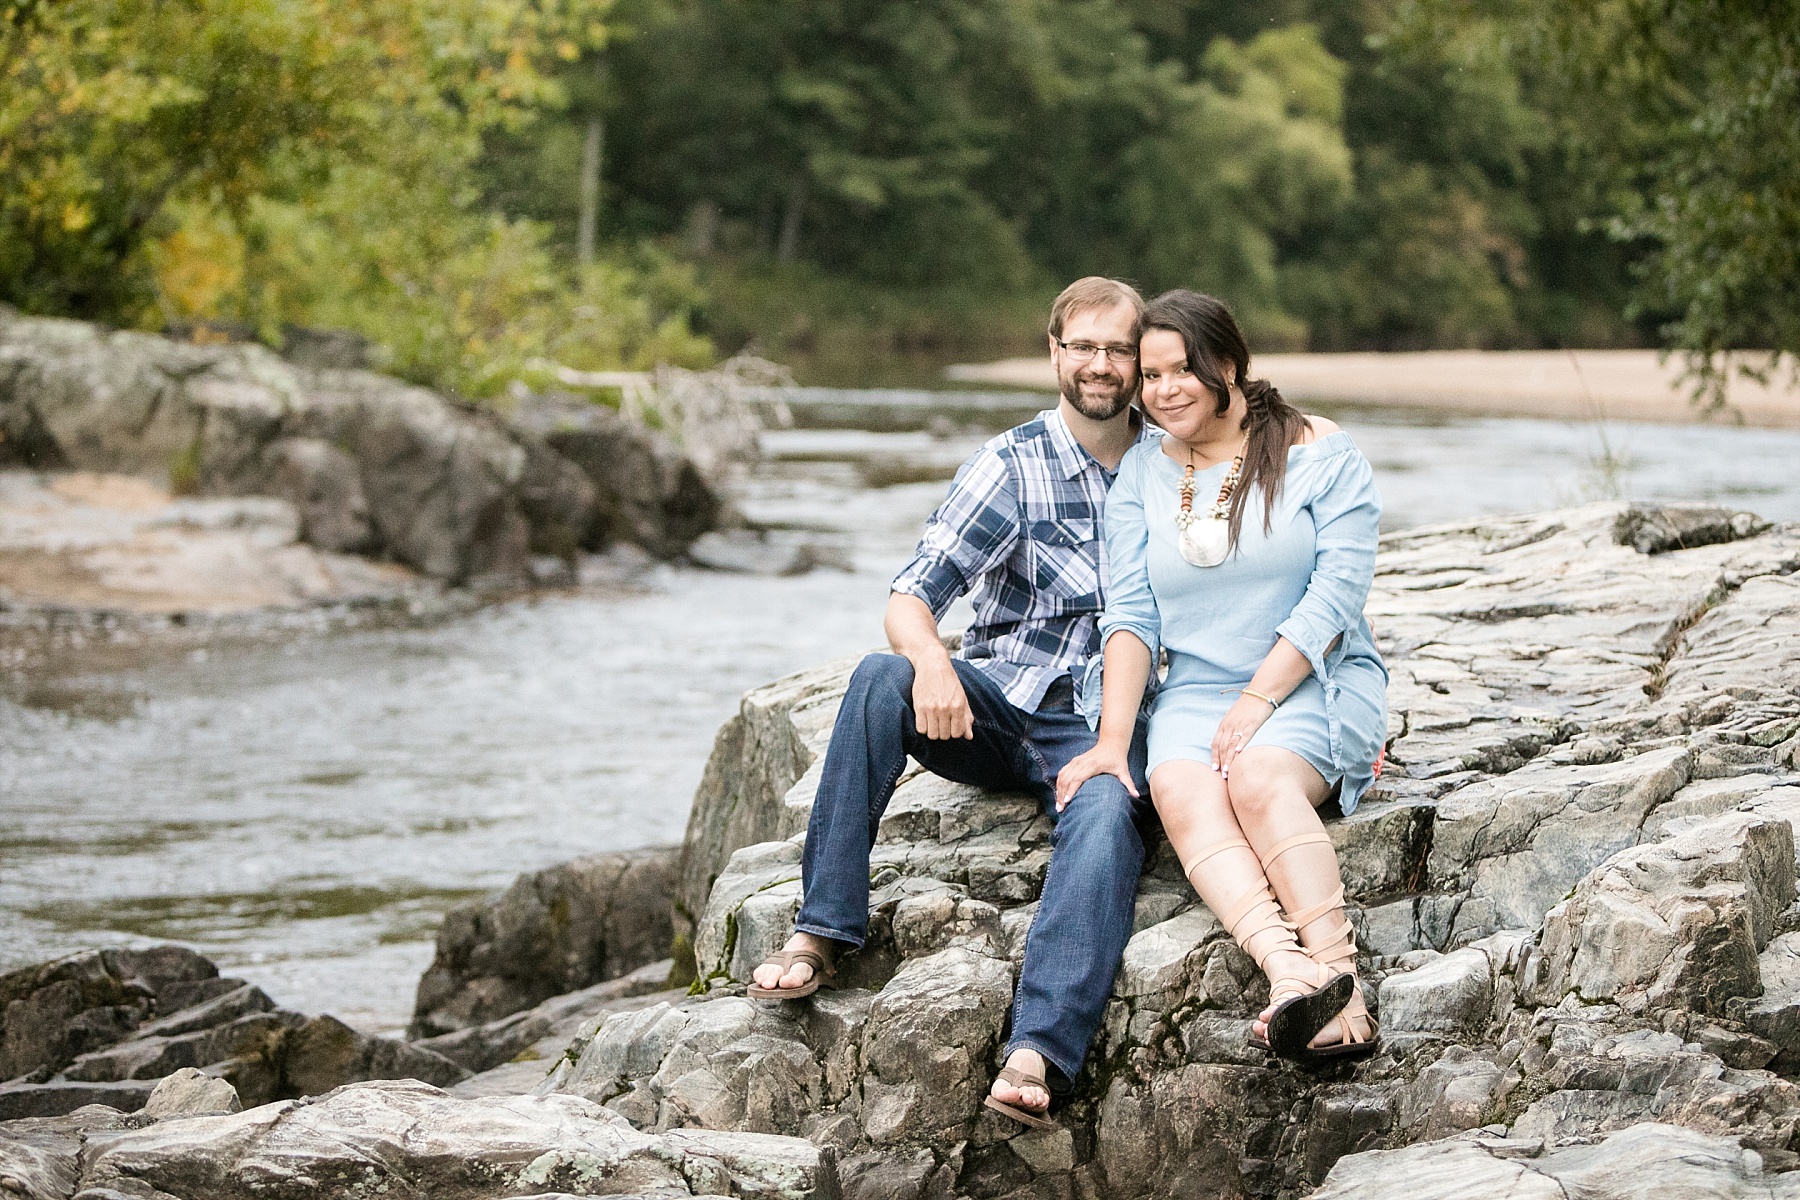 A Big Falls elopement session just outside of Eau Claire was perfect for these two hailing from different parts of the world.